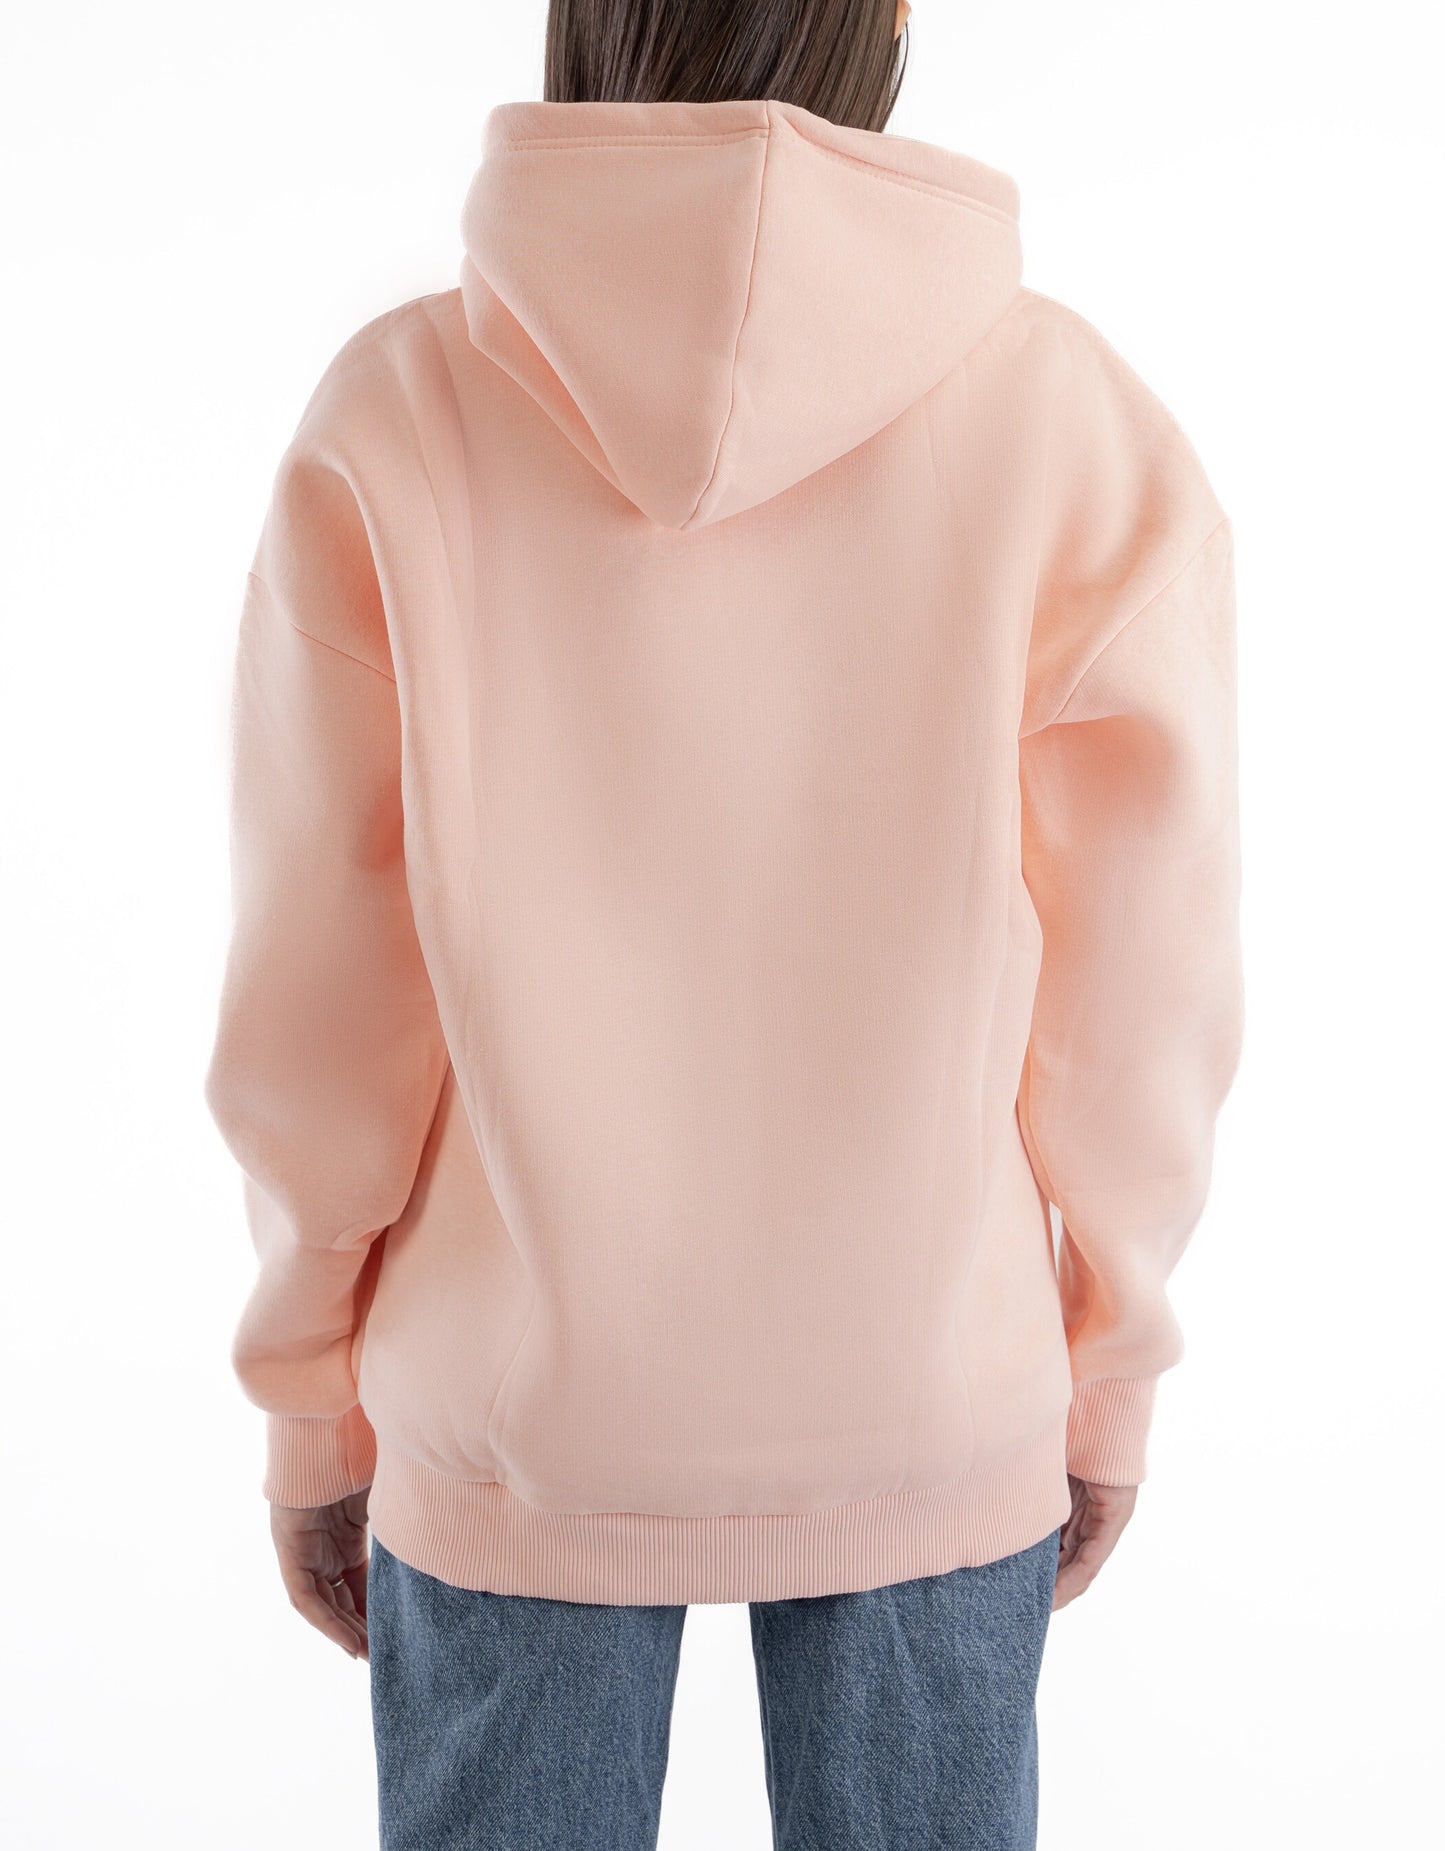 SIMON PINK OVER-SIZED HOODIE